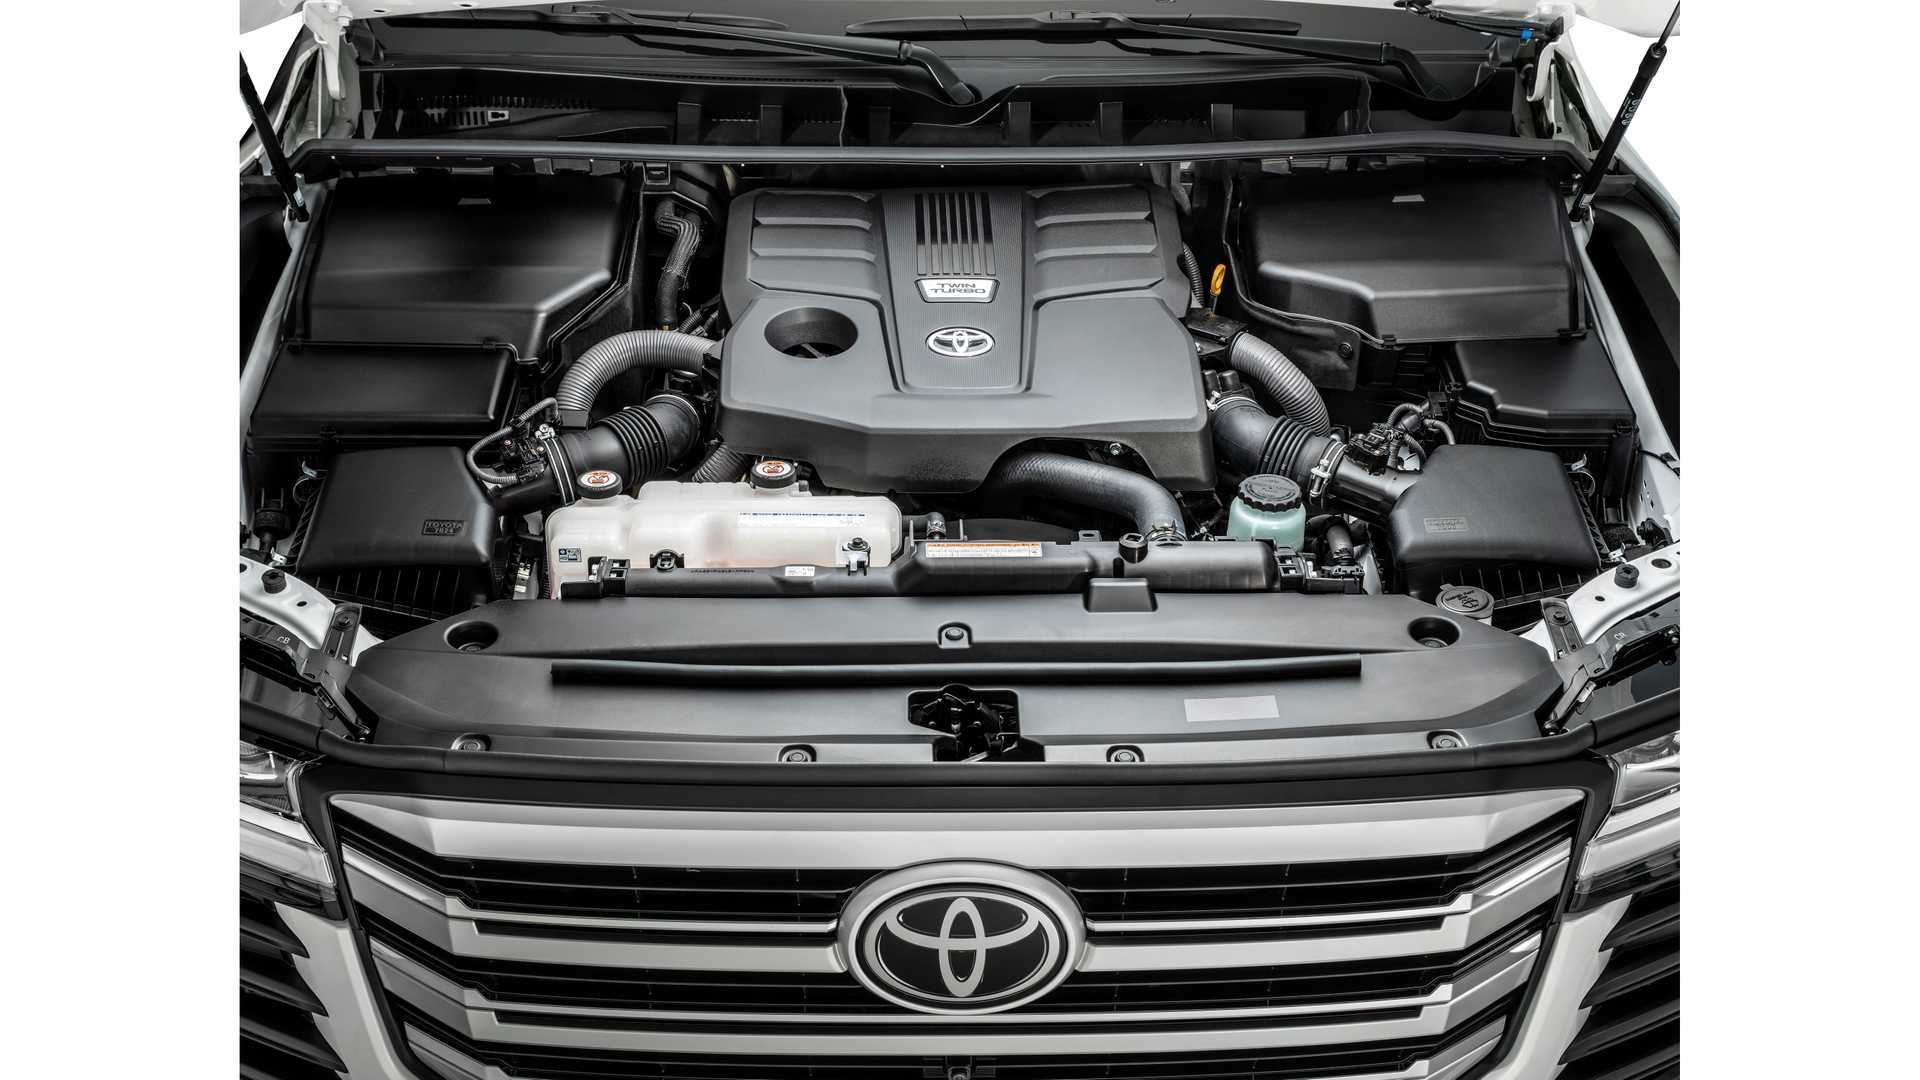 Checkout Here What You Get In The Brand New Toyota Land Cruiser 2022